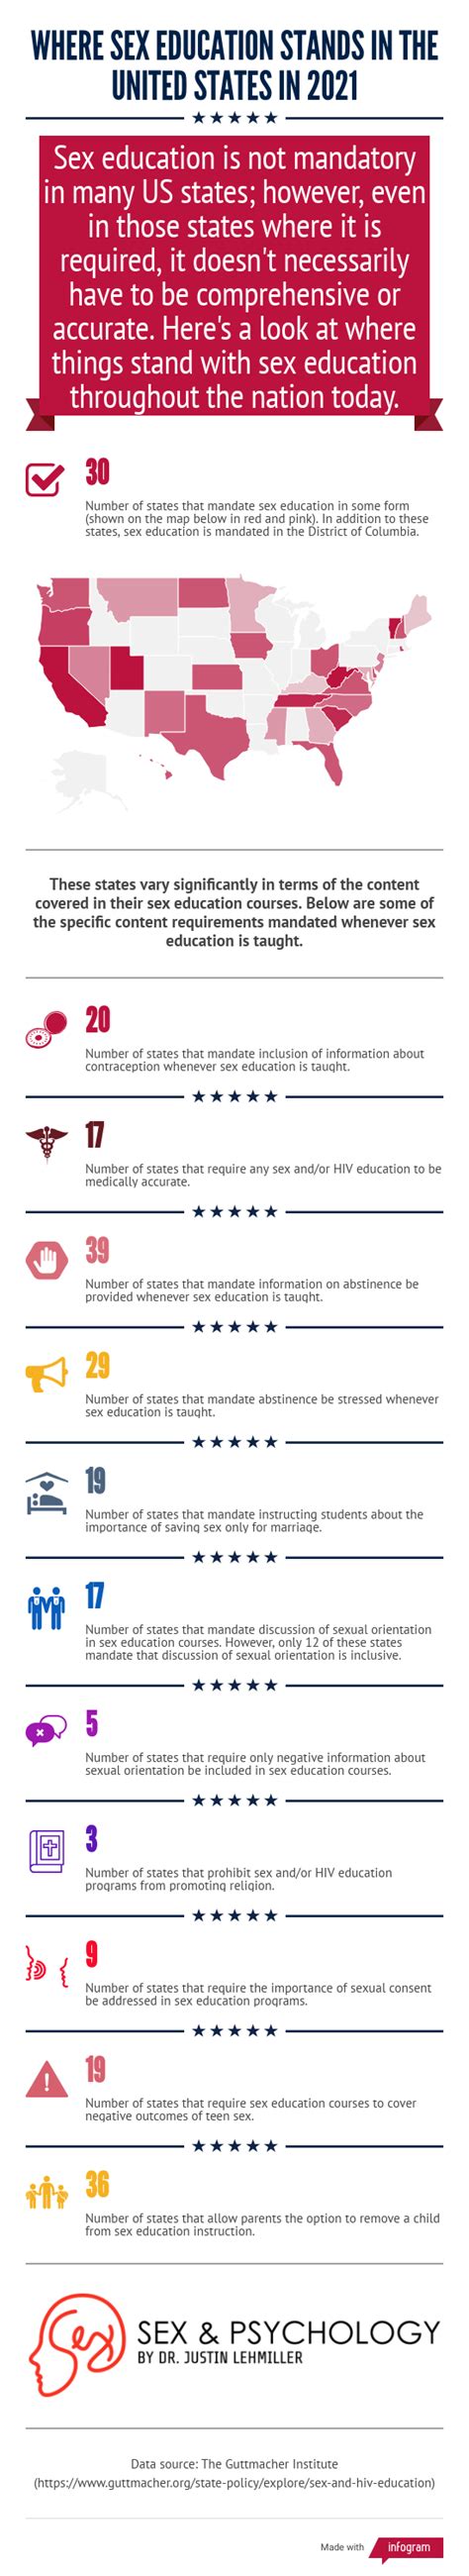 The State Of Sex Education In The United States In 2021 Infographic Sex And Psychology